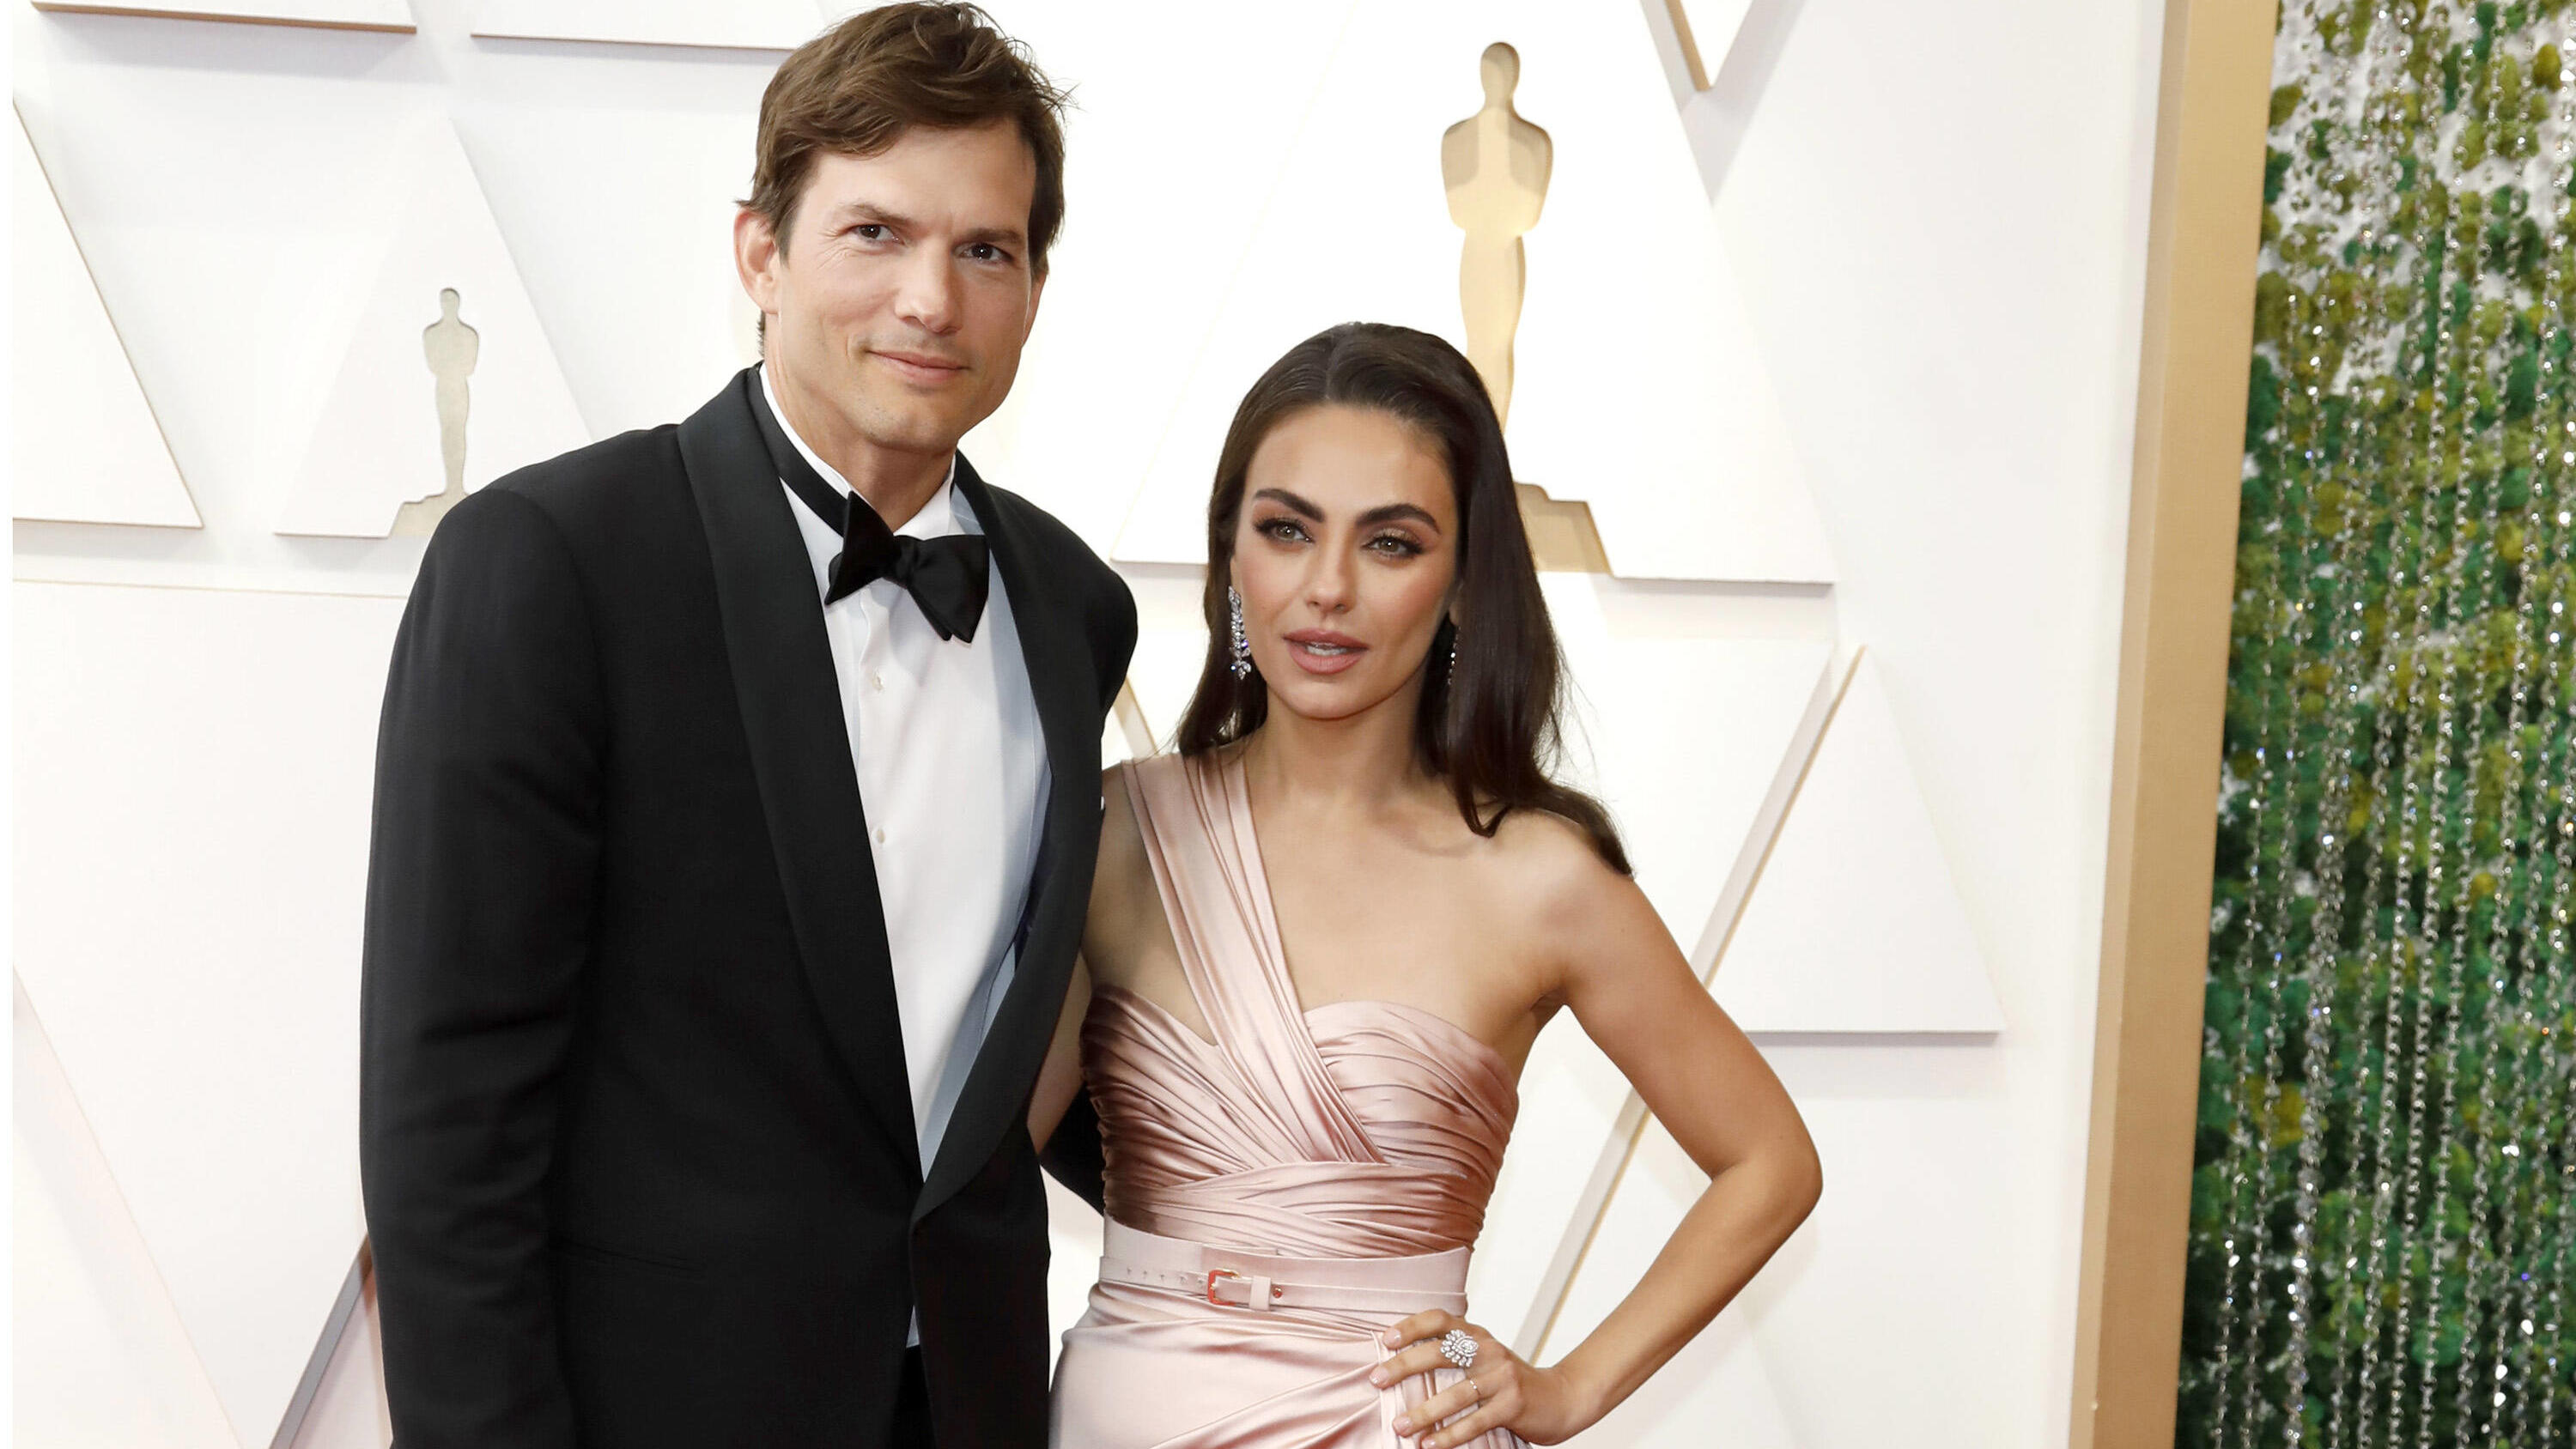  94th Academy Awards Oscars - Red Carpet Arrivals Featuring: Ashton Kutcher, Mila Kunis Where: Los Angeles, California, United States When: 28 Mar 2022 Credit: Abby Grant/Cover Images PUBLICATIONxNOTxINxUKxFRA Copyright: xx 51341765